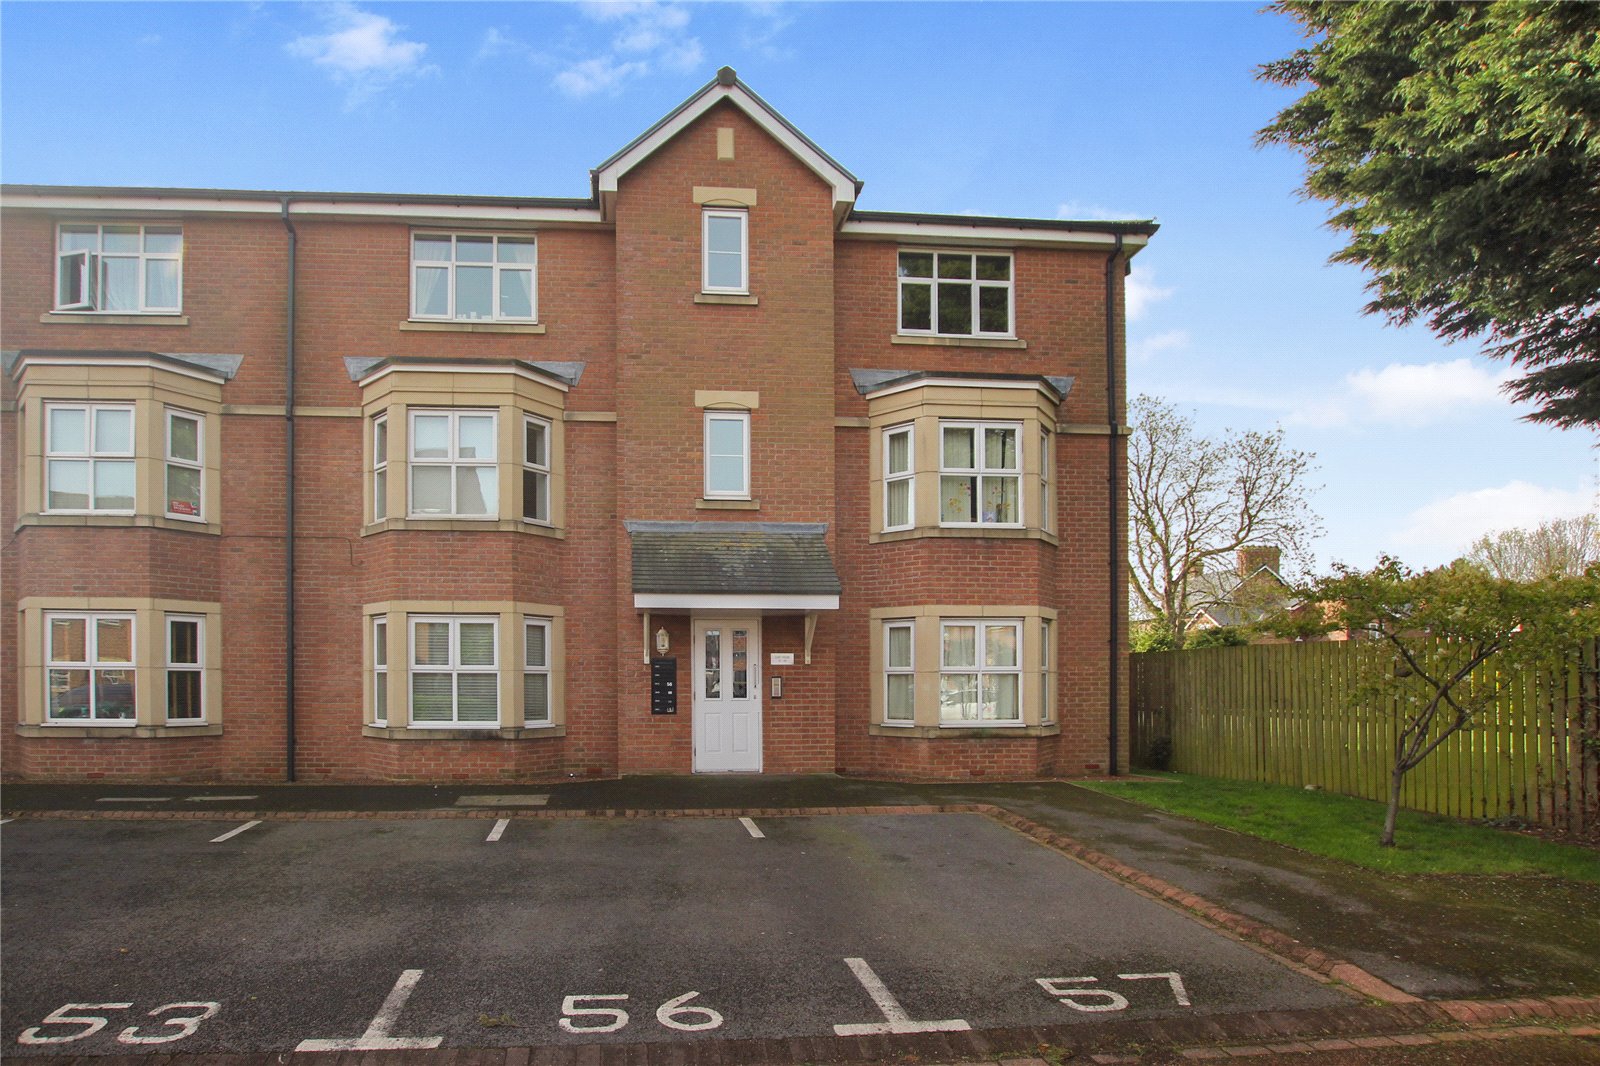 2 bed apartment for sale in Dorman Gardens, Linthorpe - Property Image 1